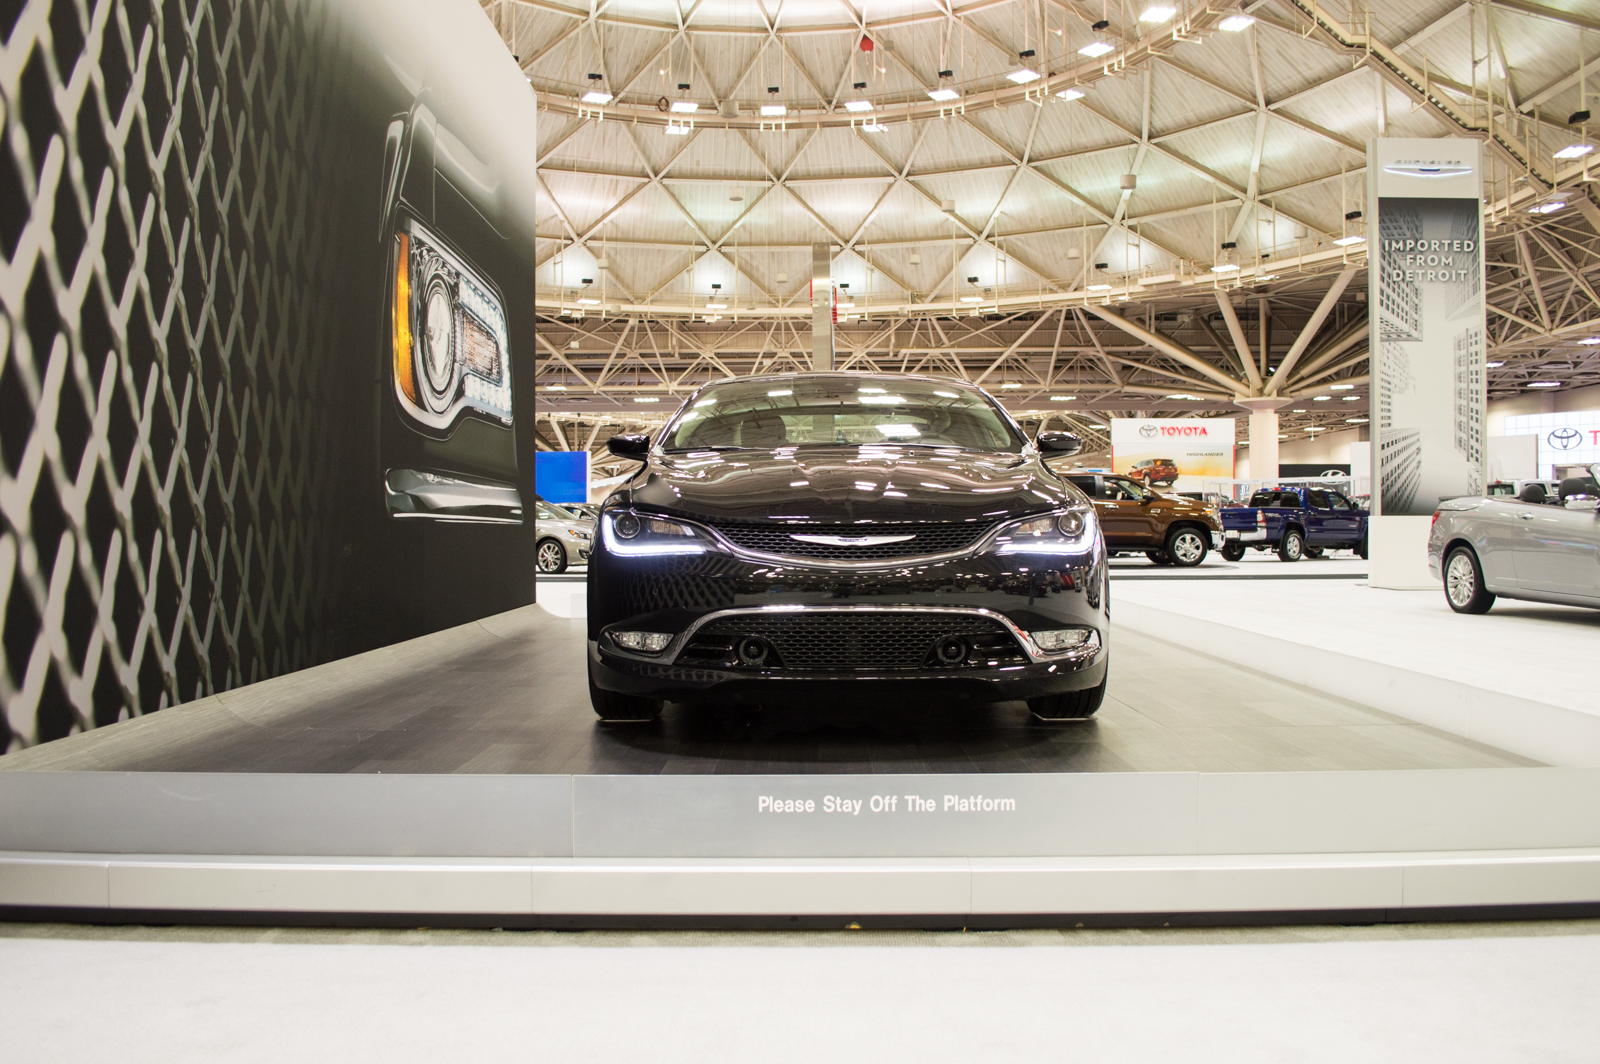 2015 Chrysler 200 Twin Cities Auto Show (2)